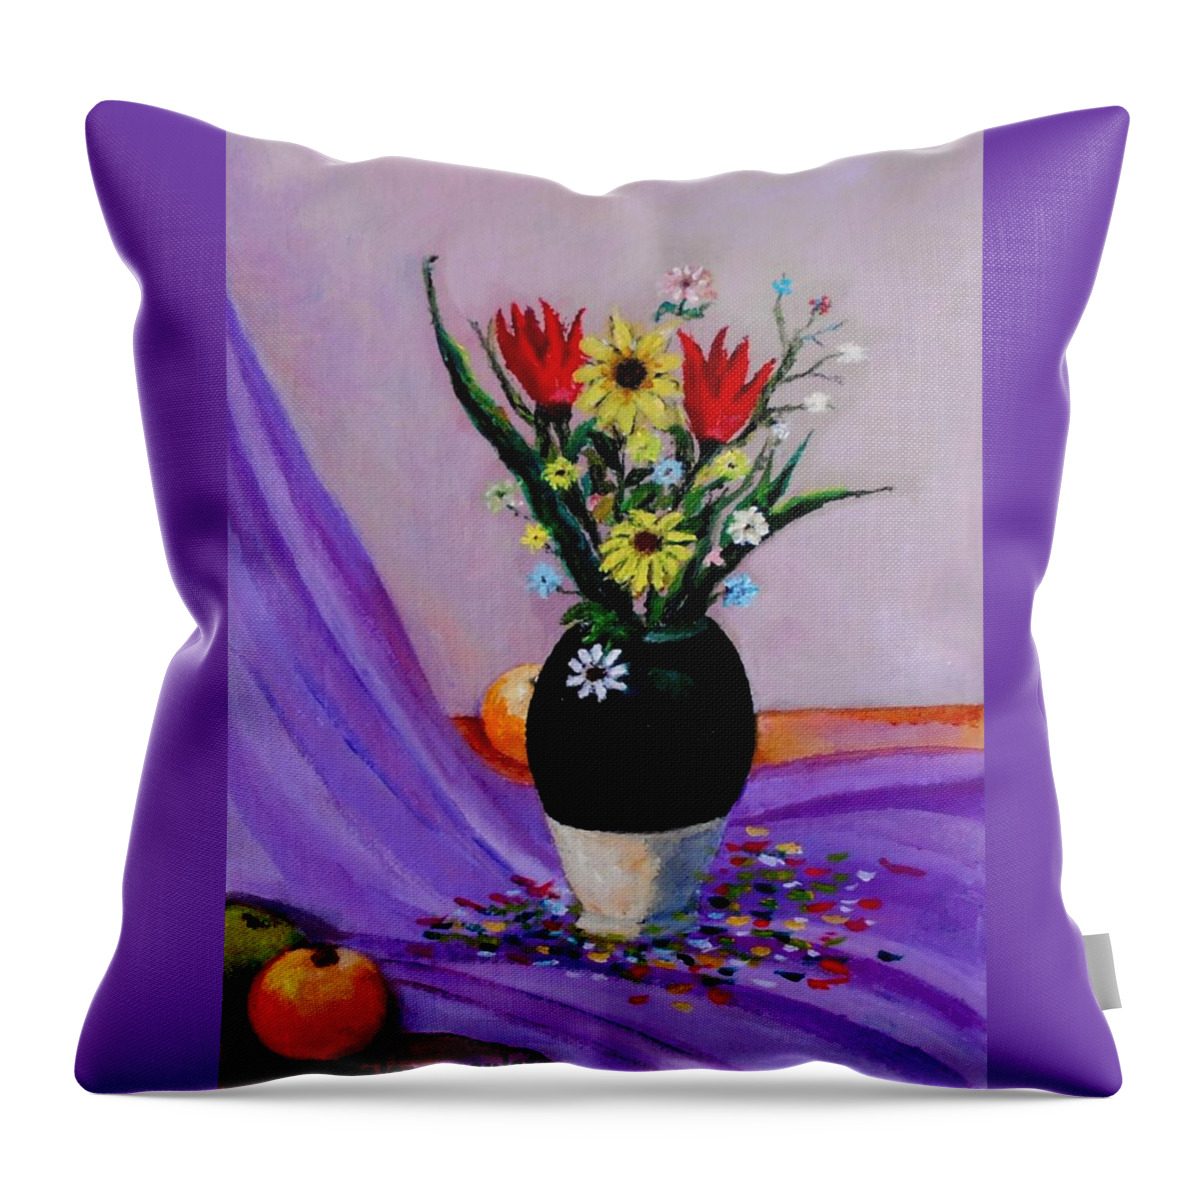 Still Life Throw Pillow featuring the painting Still life with flowers and fruits by Konstantinos Charalampopoulos